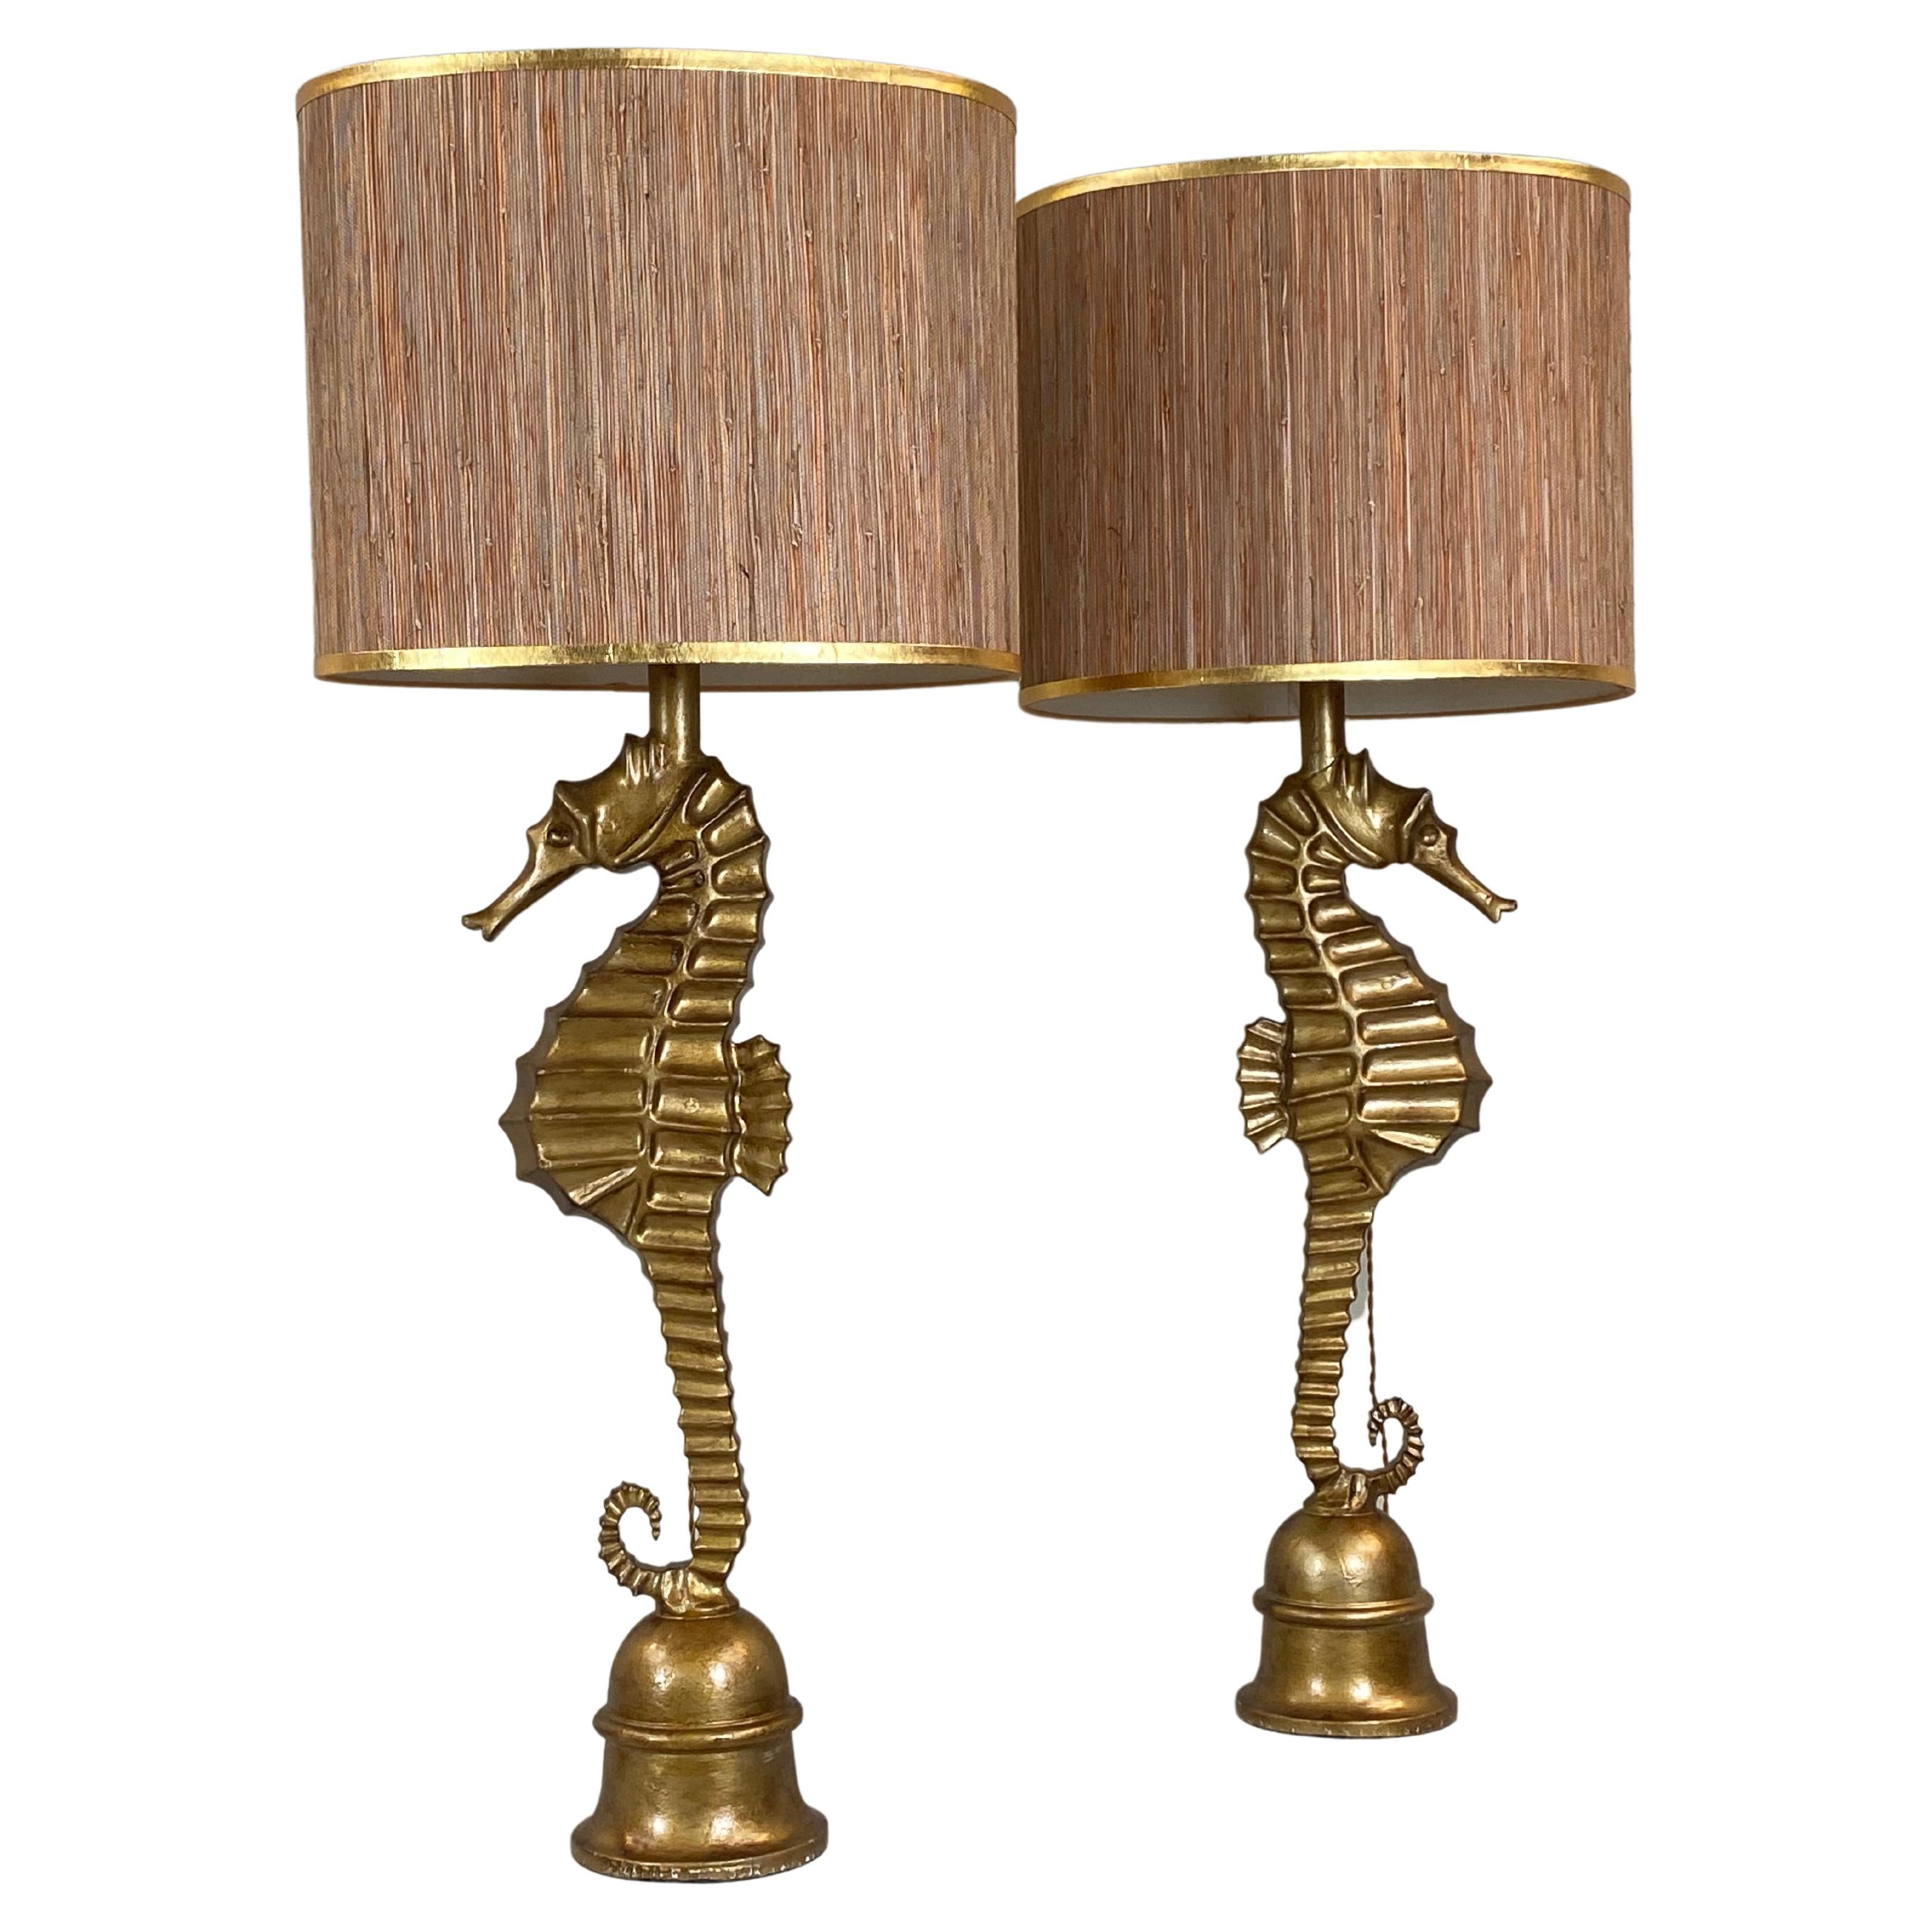 Pair of Art Deco style vintage metallic seahorse table lamps. France, 1970s.